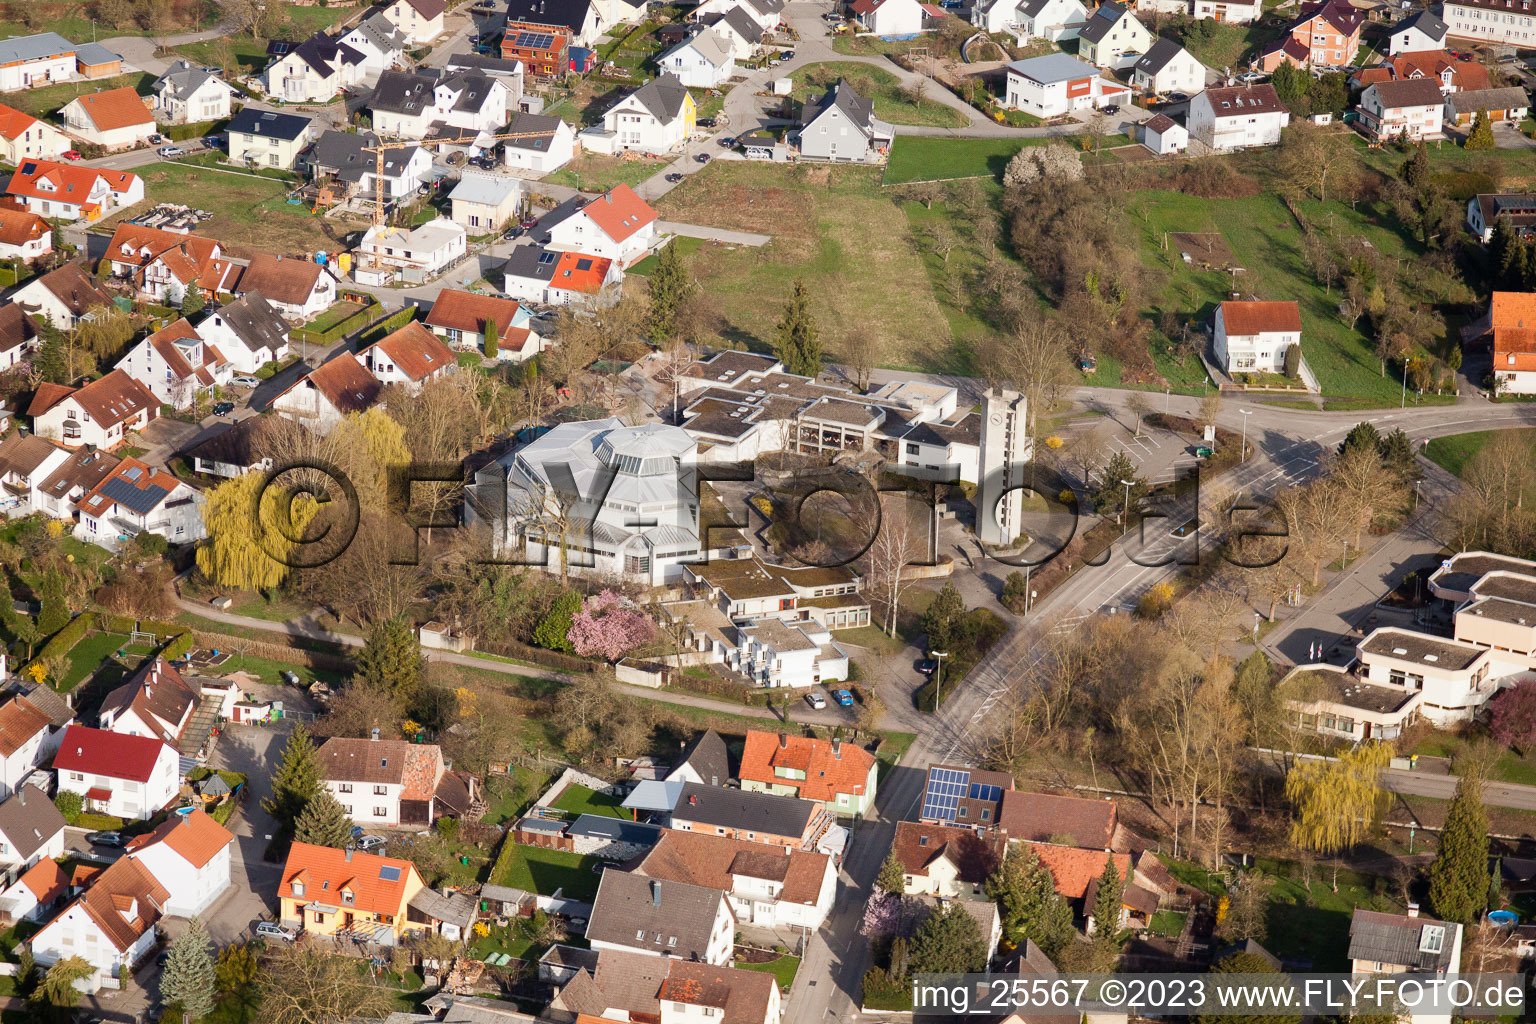 Elchesheim in the state Baden-Wuerttemberg, Germany seen from above